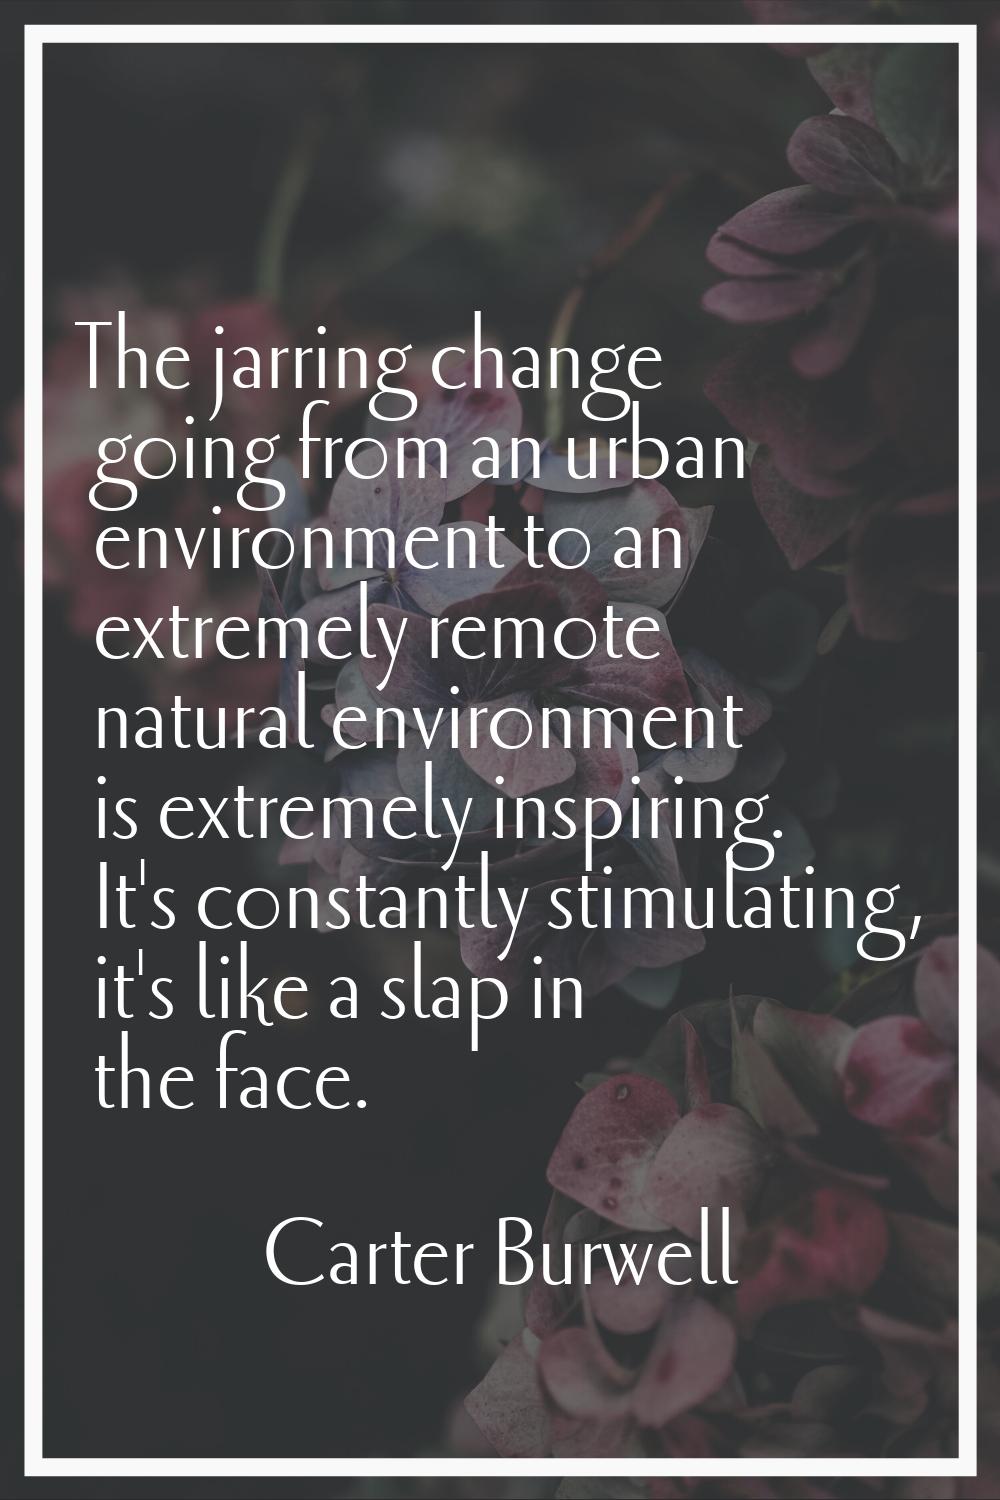 The jarring change going from an urban environment to an extremely remote natural environment is ex